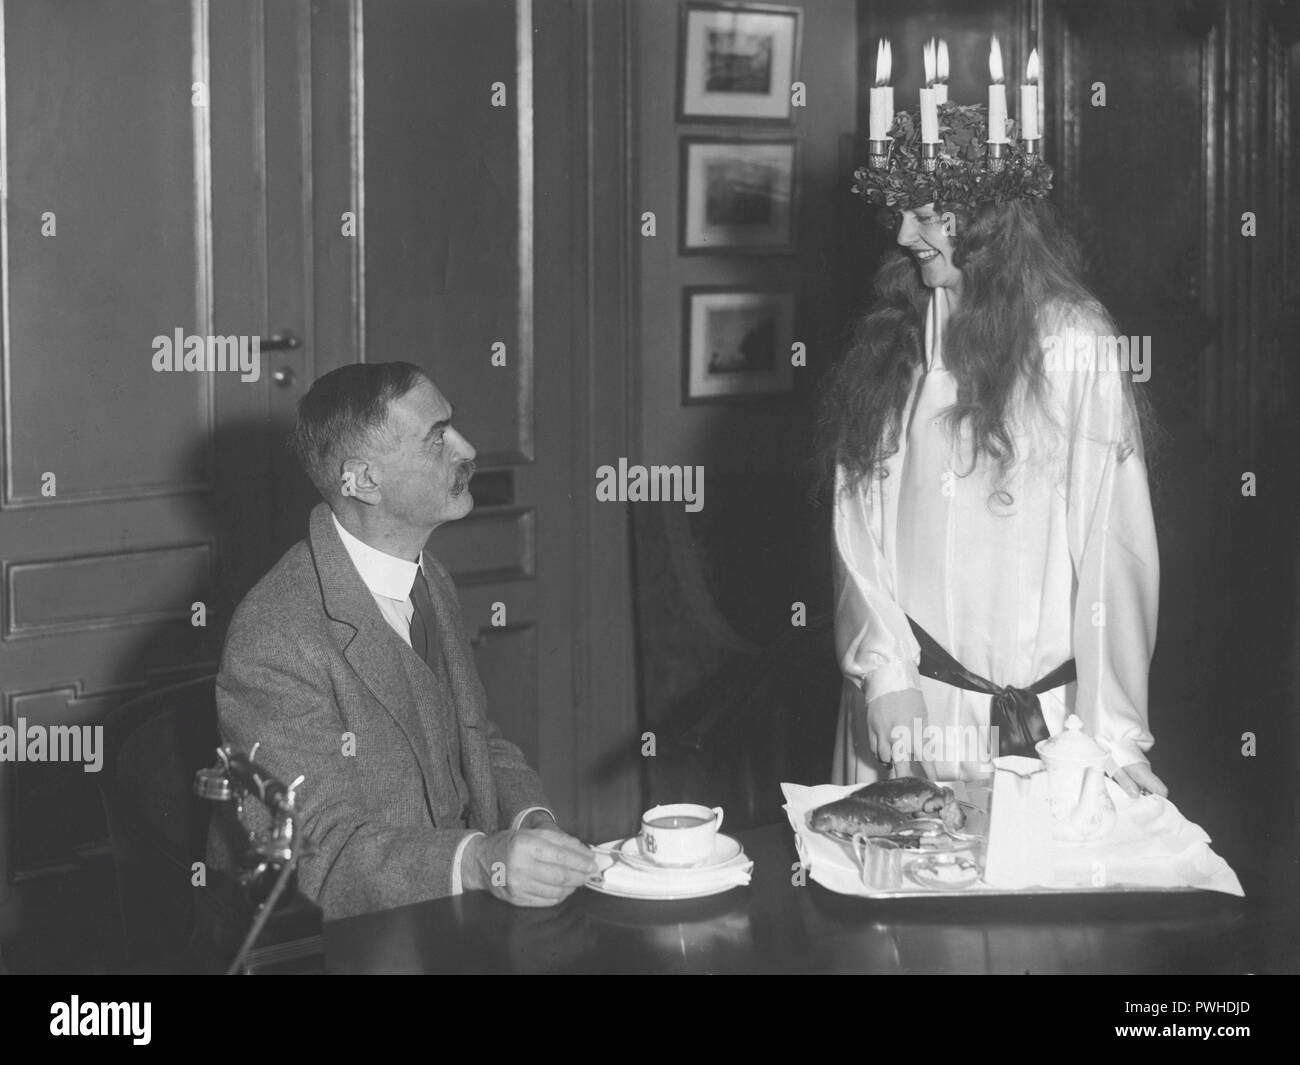 Lucia celebration 1930. Pictured Karl Landsteiner , 1868-1943, Austrian biologist, physician, and immunologist. Known for having developed the modern system of classification of blood groups. Here 1930 in Stockholm when a young woman as Lucia treats him for coffee. Landsteiner recieved the Nobel Prize in Physiology or Medicine this year and is in Stockholm to accept the prize. Stock Photo